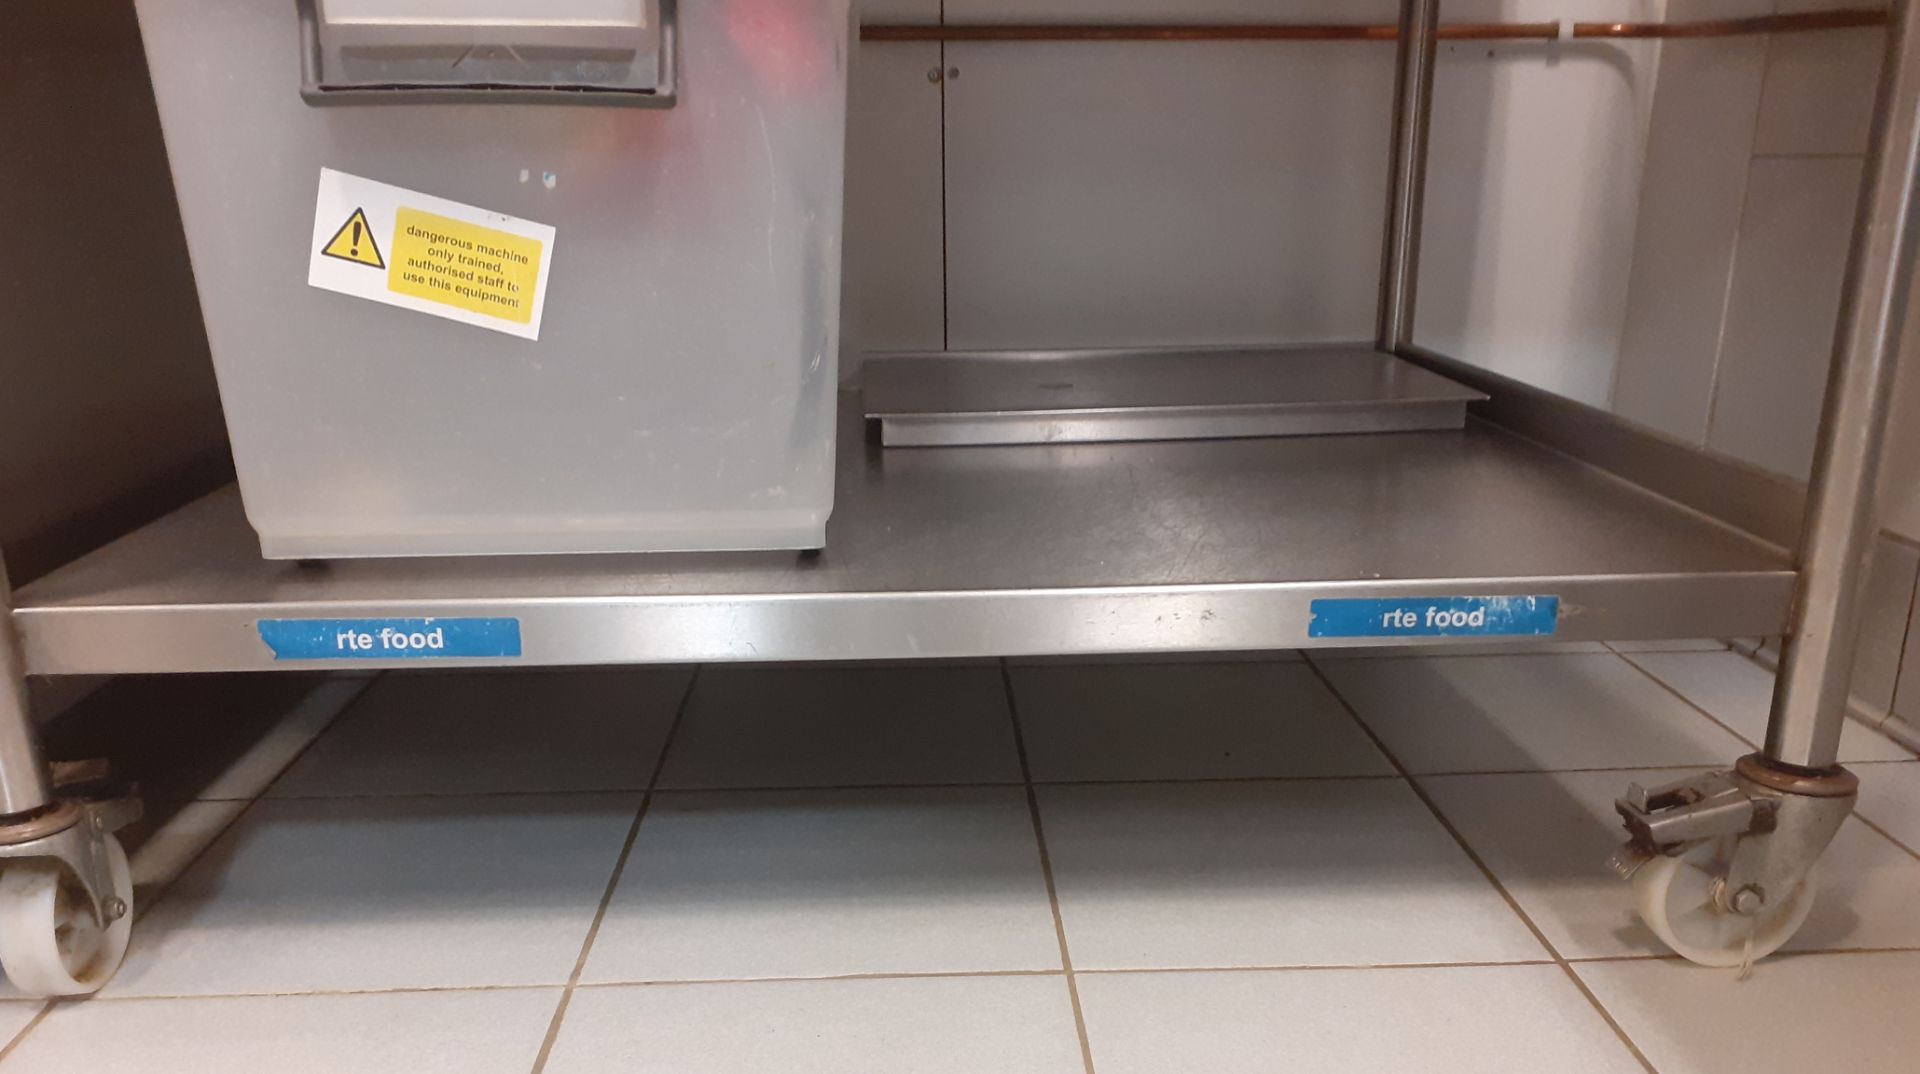 1 x Stainless Steel Prep Counter on Castors - Features Upstand and Undershelf - CL582 - Location: - Image 4 of 4